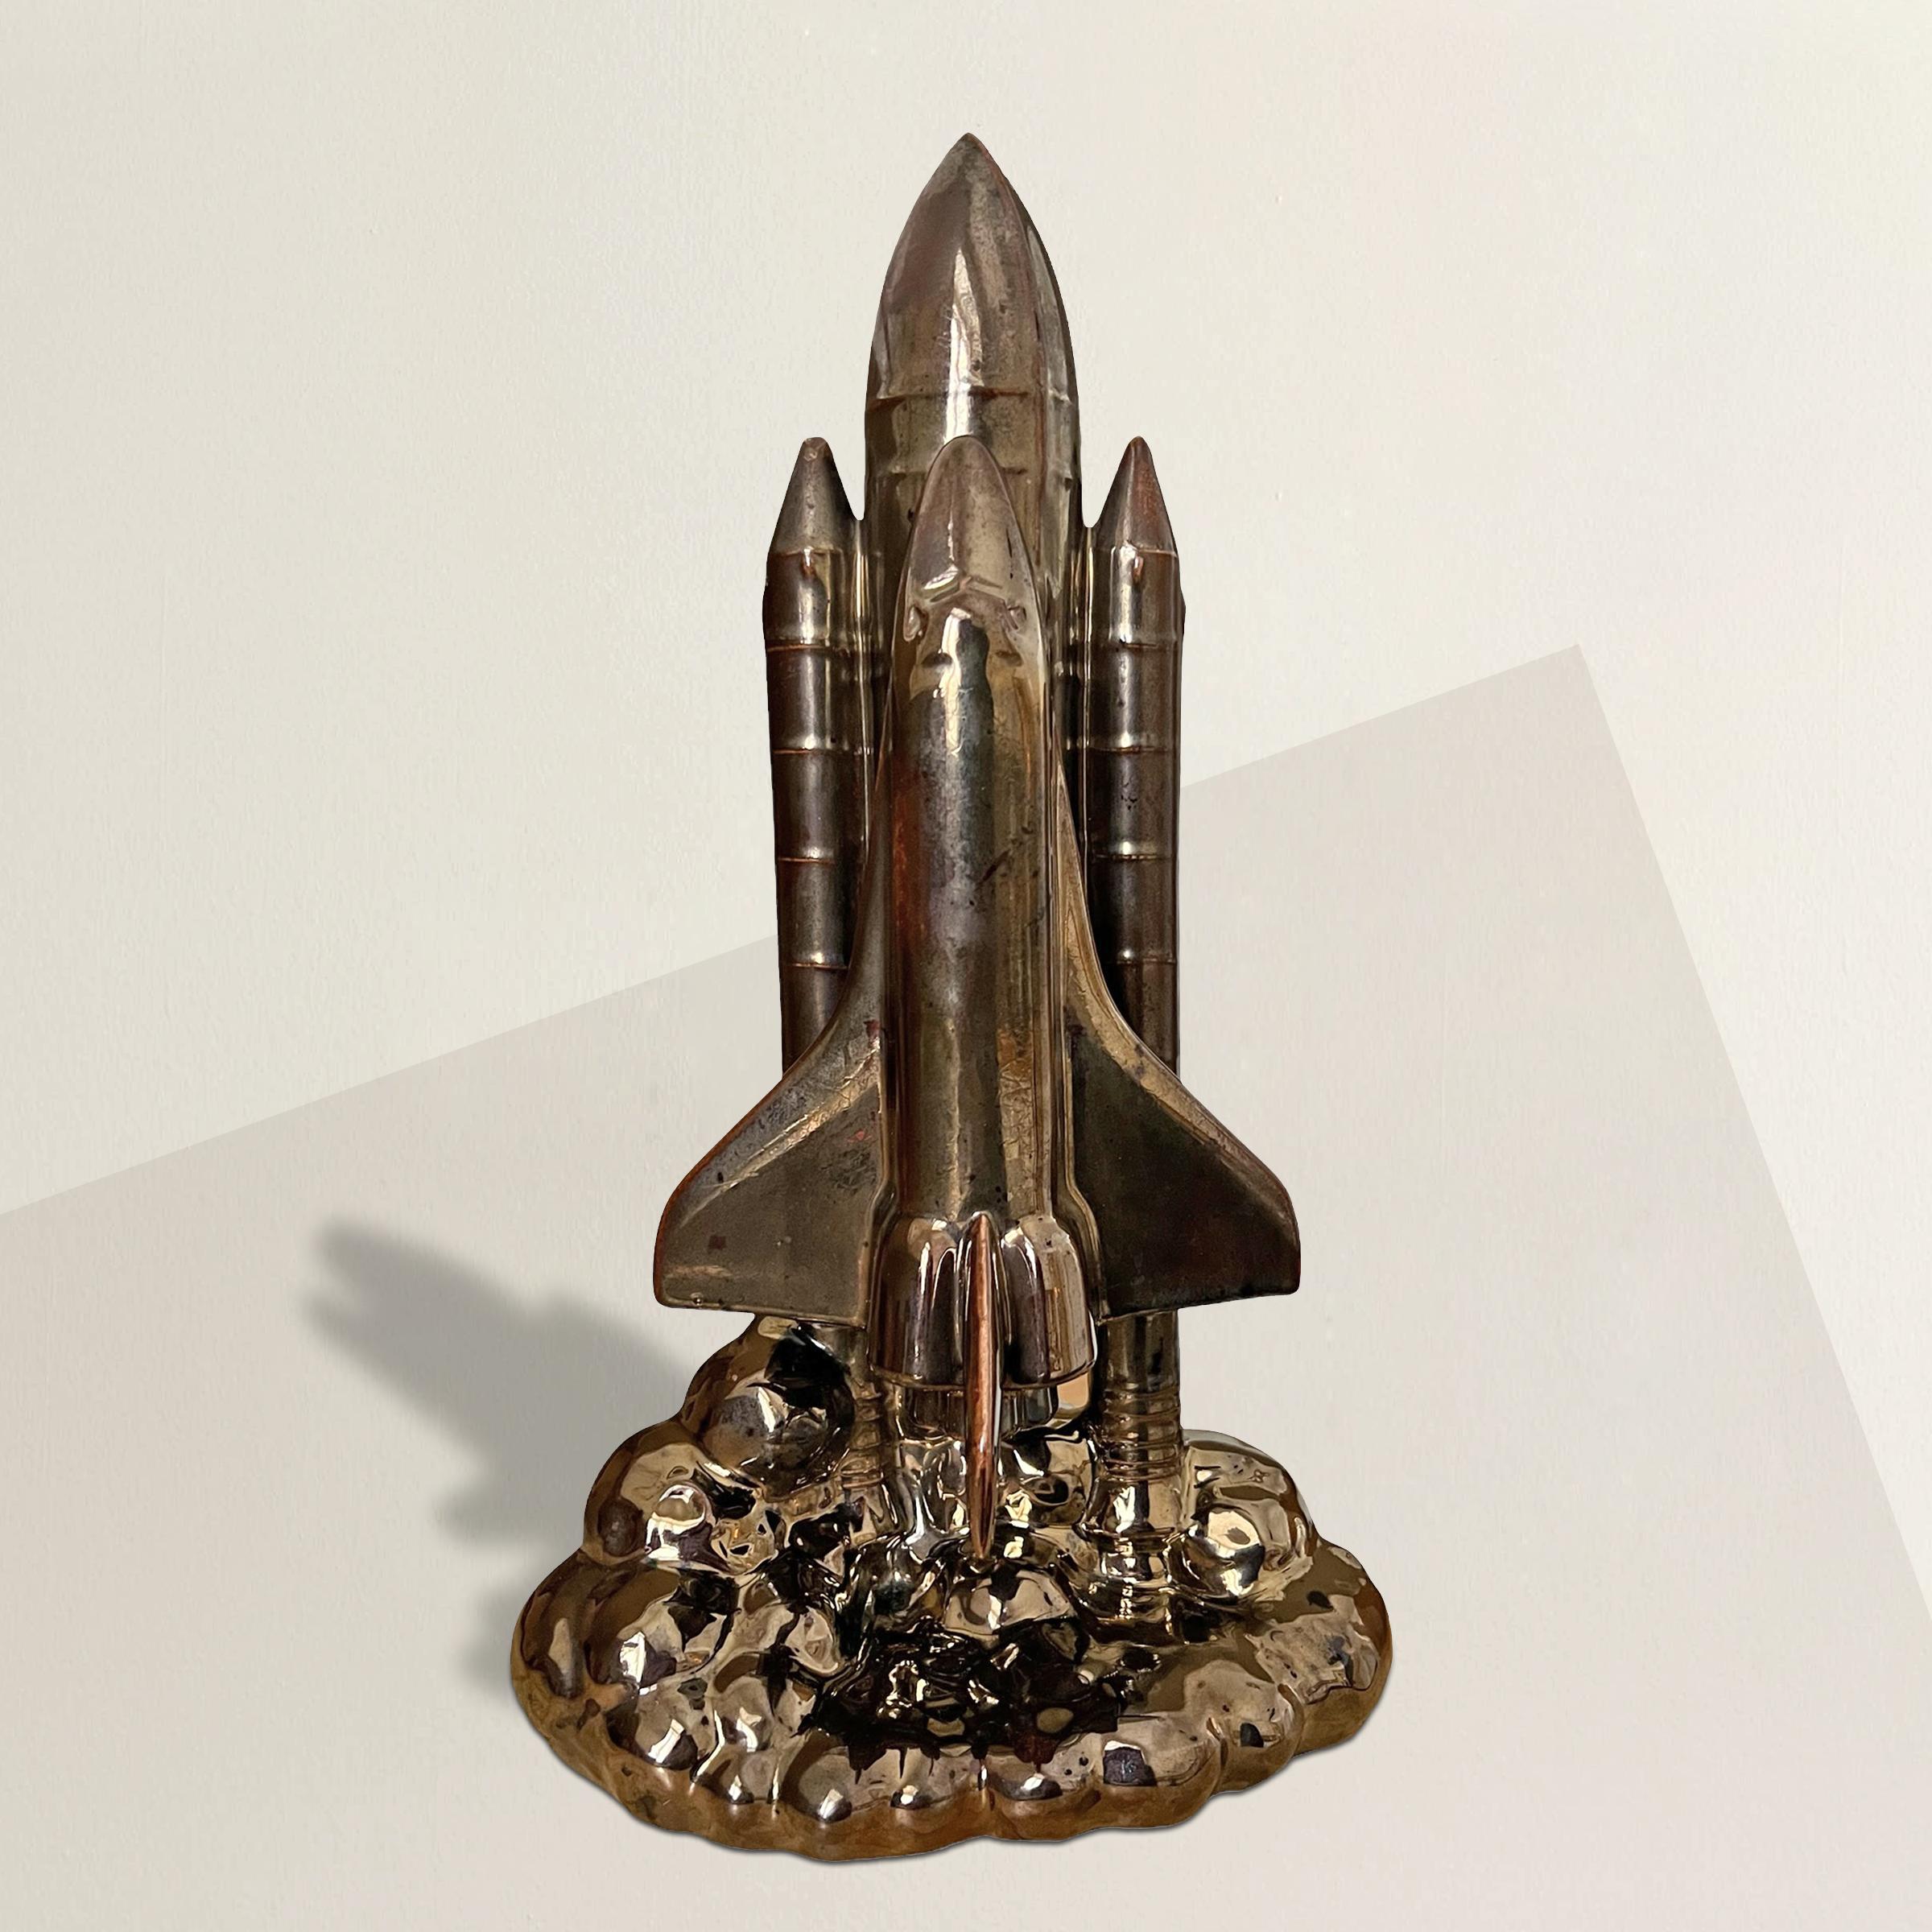 This mid-20th century American space-age porcelain sculpture is a striking ode to NASA's space exploration. Depicting a space shuttle in the initial stages of launch, the orbiter and boosters are dynamically supported by the billowing exhaust plume,